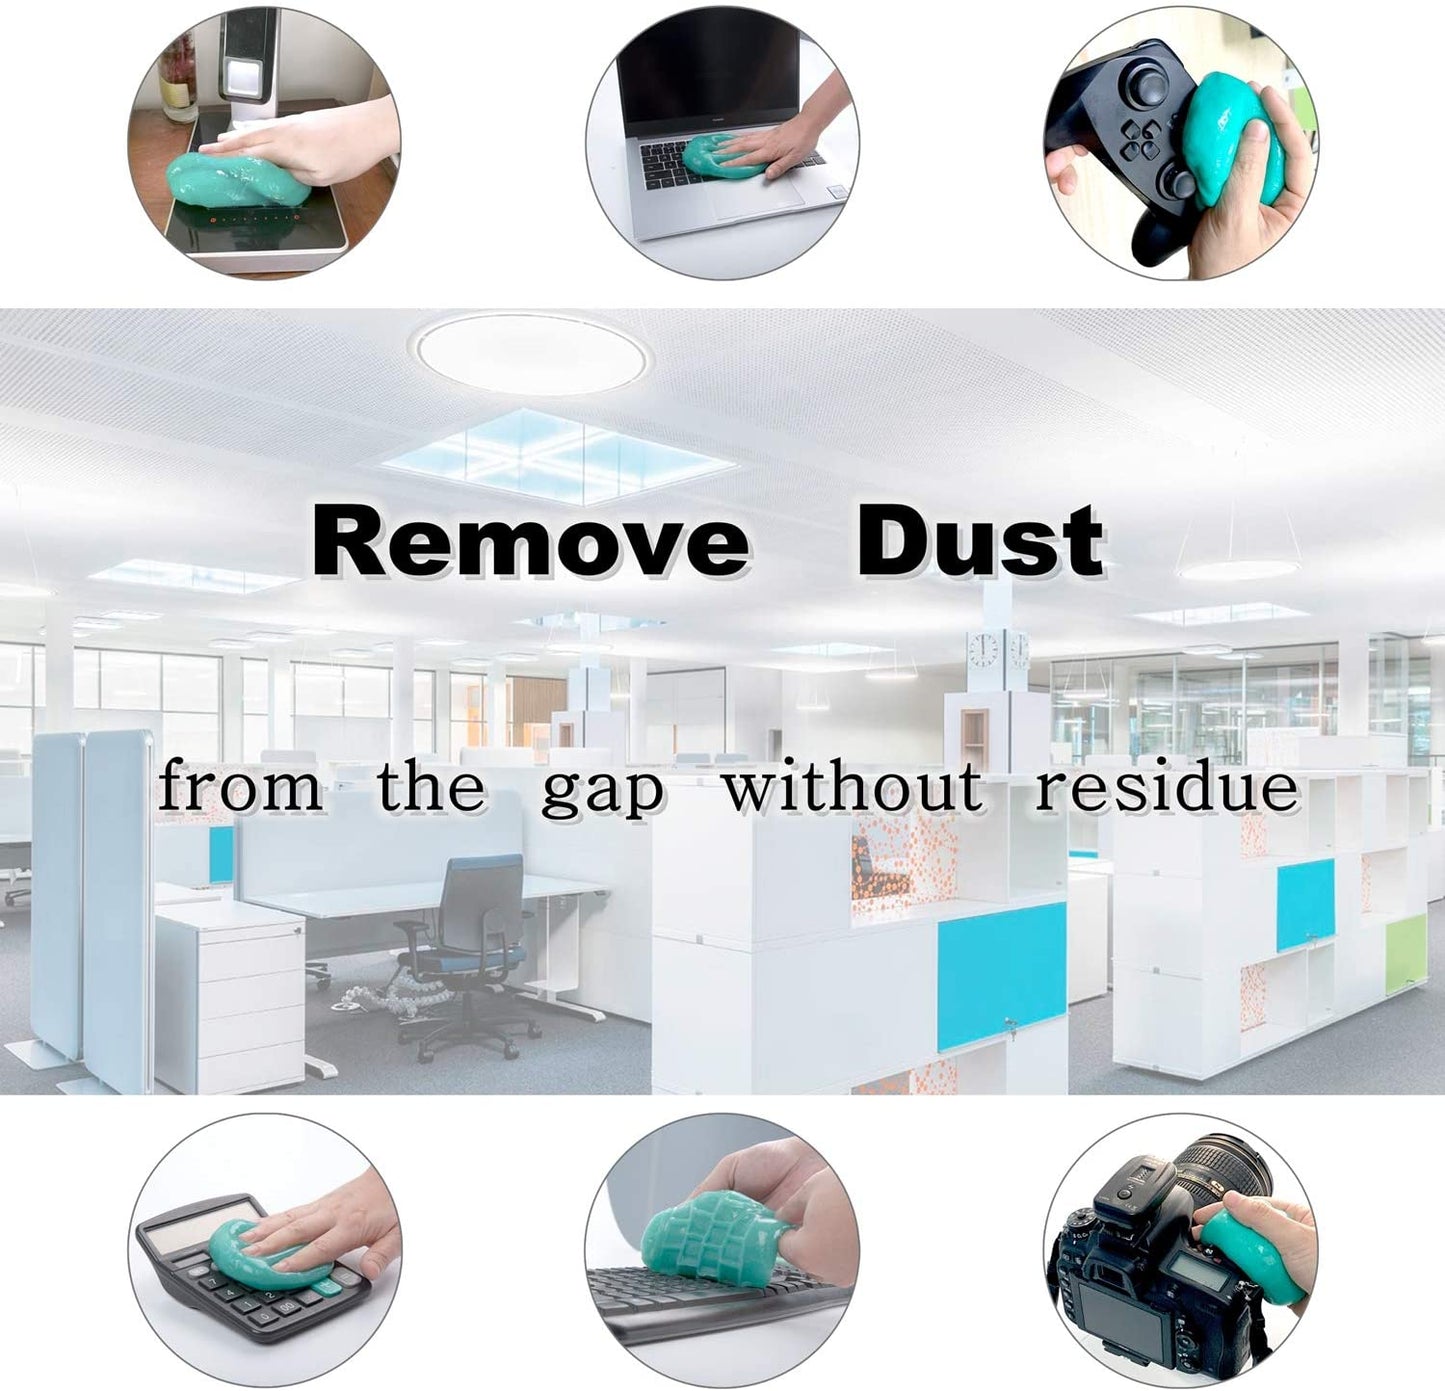 Reusable-Dust cleaning and absorbing gel pack of 2(Buy 1 get 1 FREE)